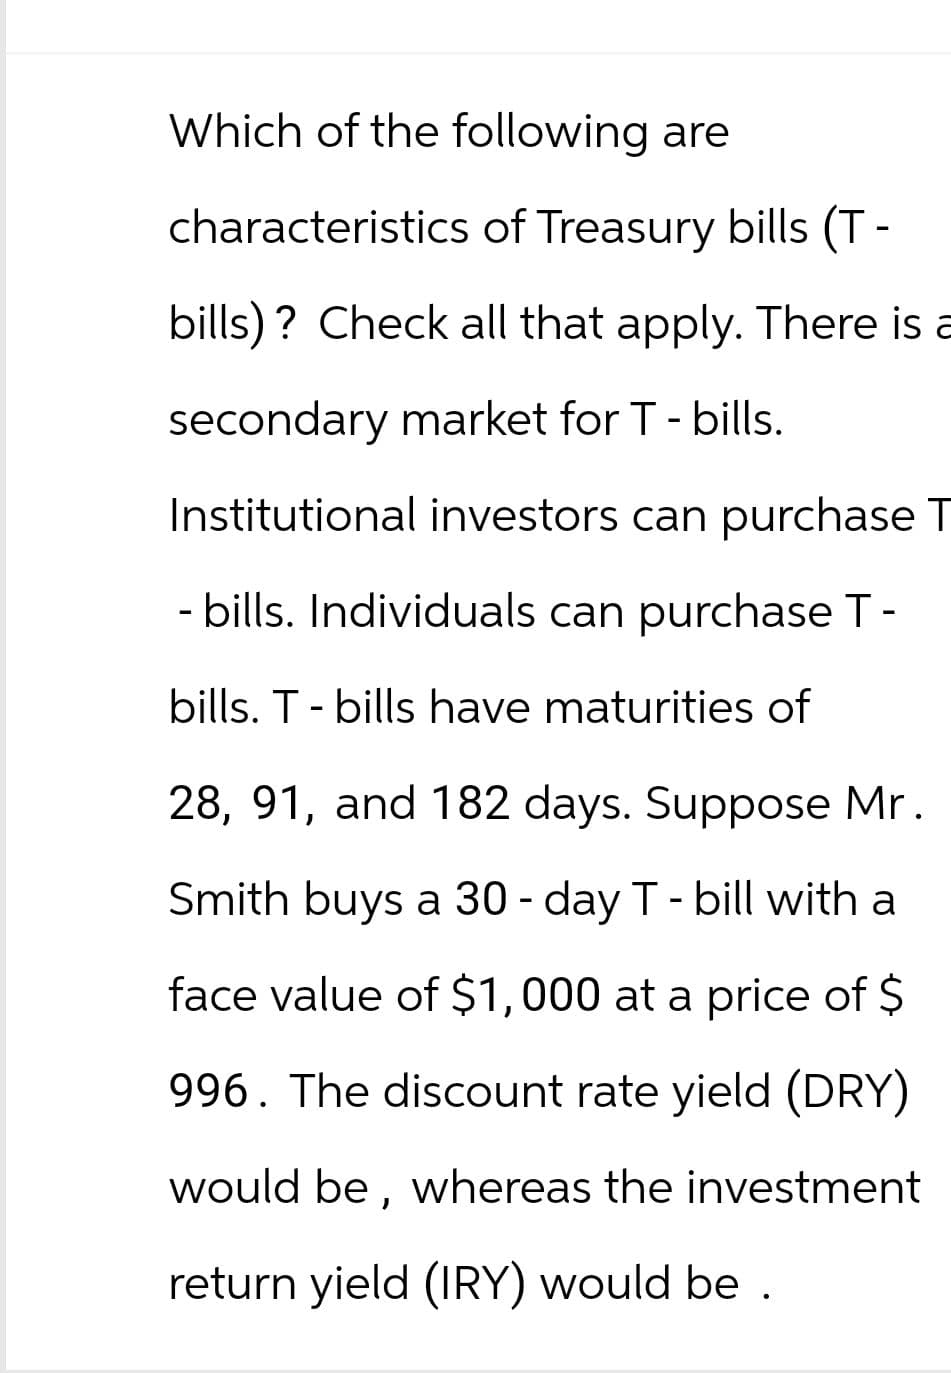 Which of the following are
characteristics of Treasury bills (T-
bills)? Check all that apply. There is a
secondary market for T - bills.
Institutional investors can purchase T
- bills. Individuals can purchase T-
bills. T - bills have maturities of
28, 91, and 182 days. Suppose Mr.
Smith buys a 30-day T - bill with a
face value of $1,000 at a price of $
996. The discount rate yield (DRY)
would be, whereas the investment
return yield (IRY) would be.